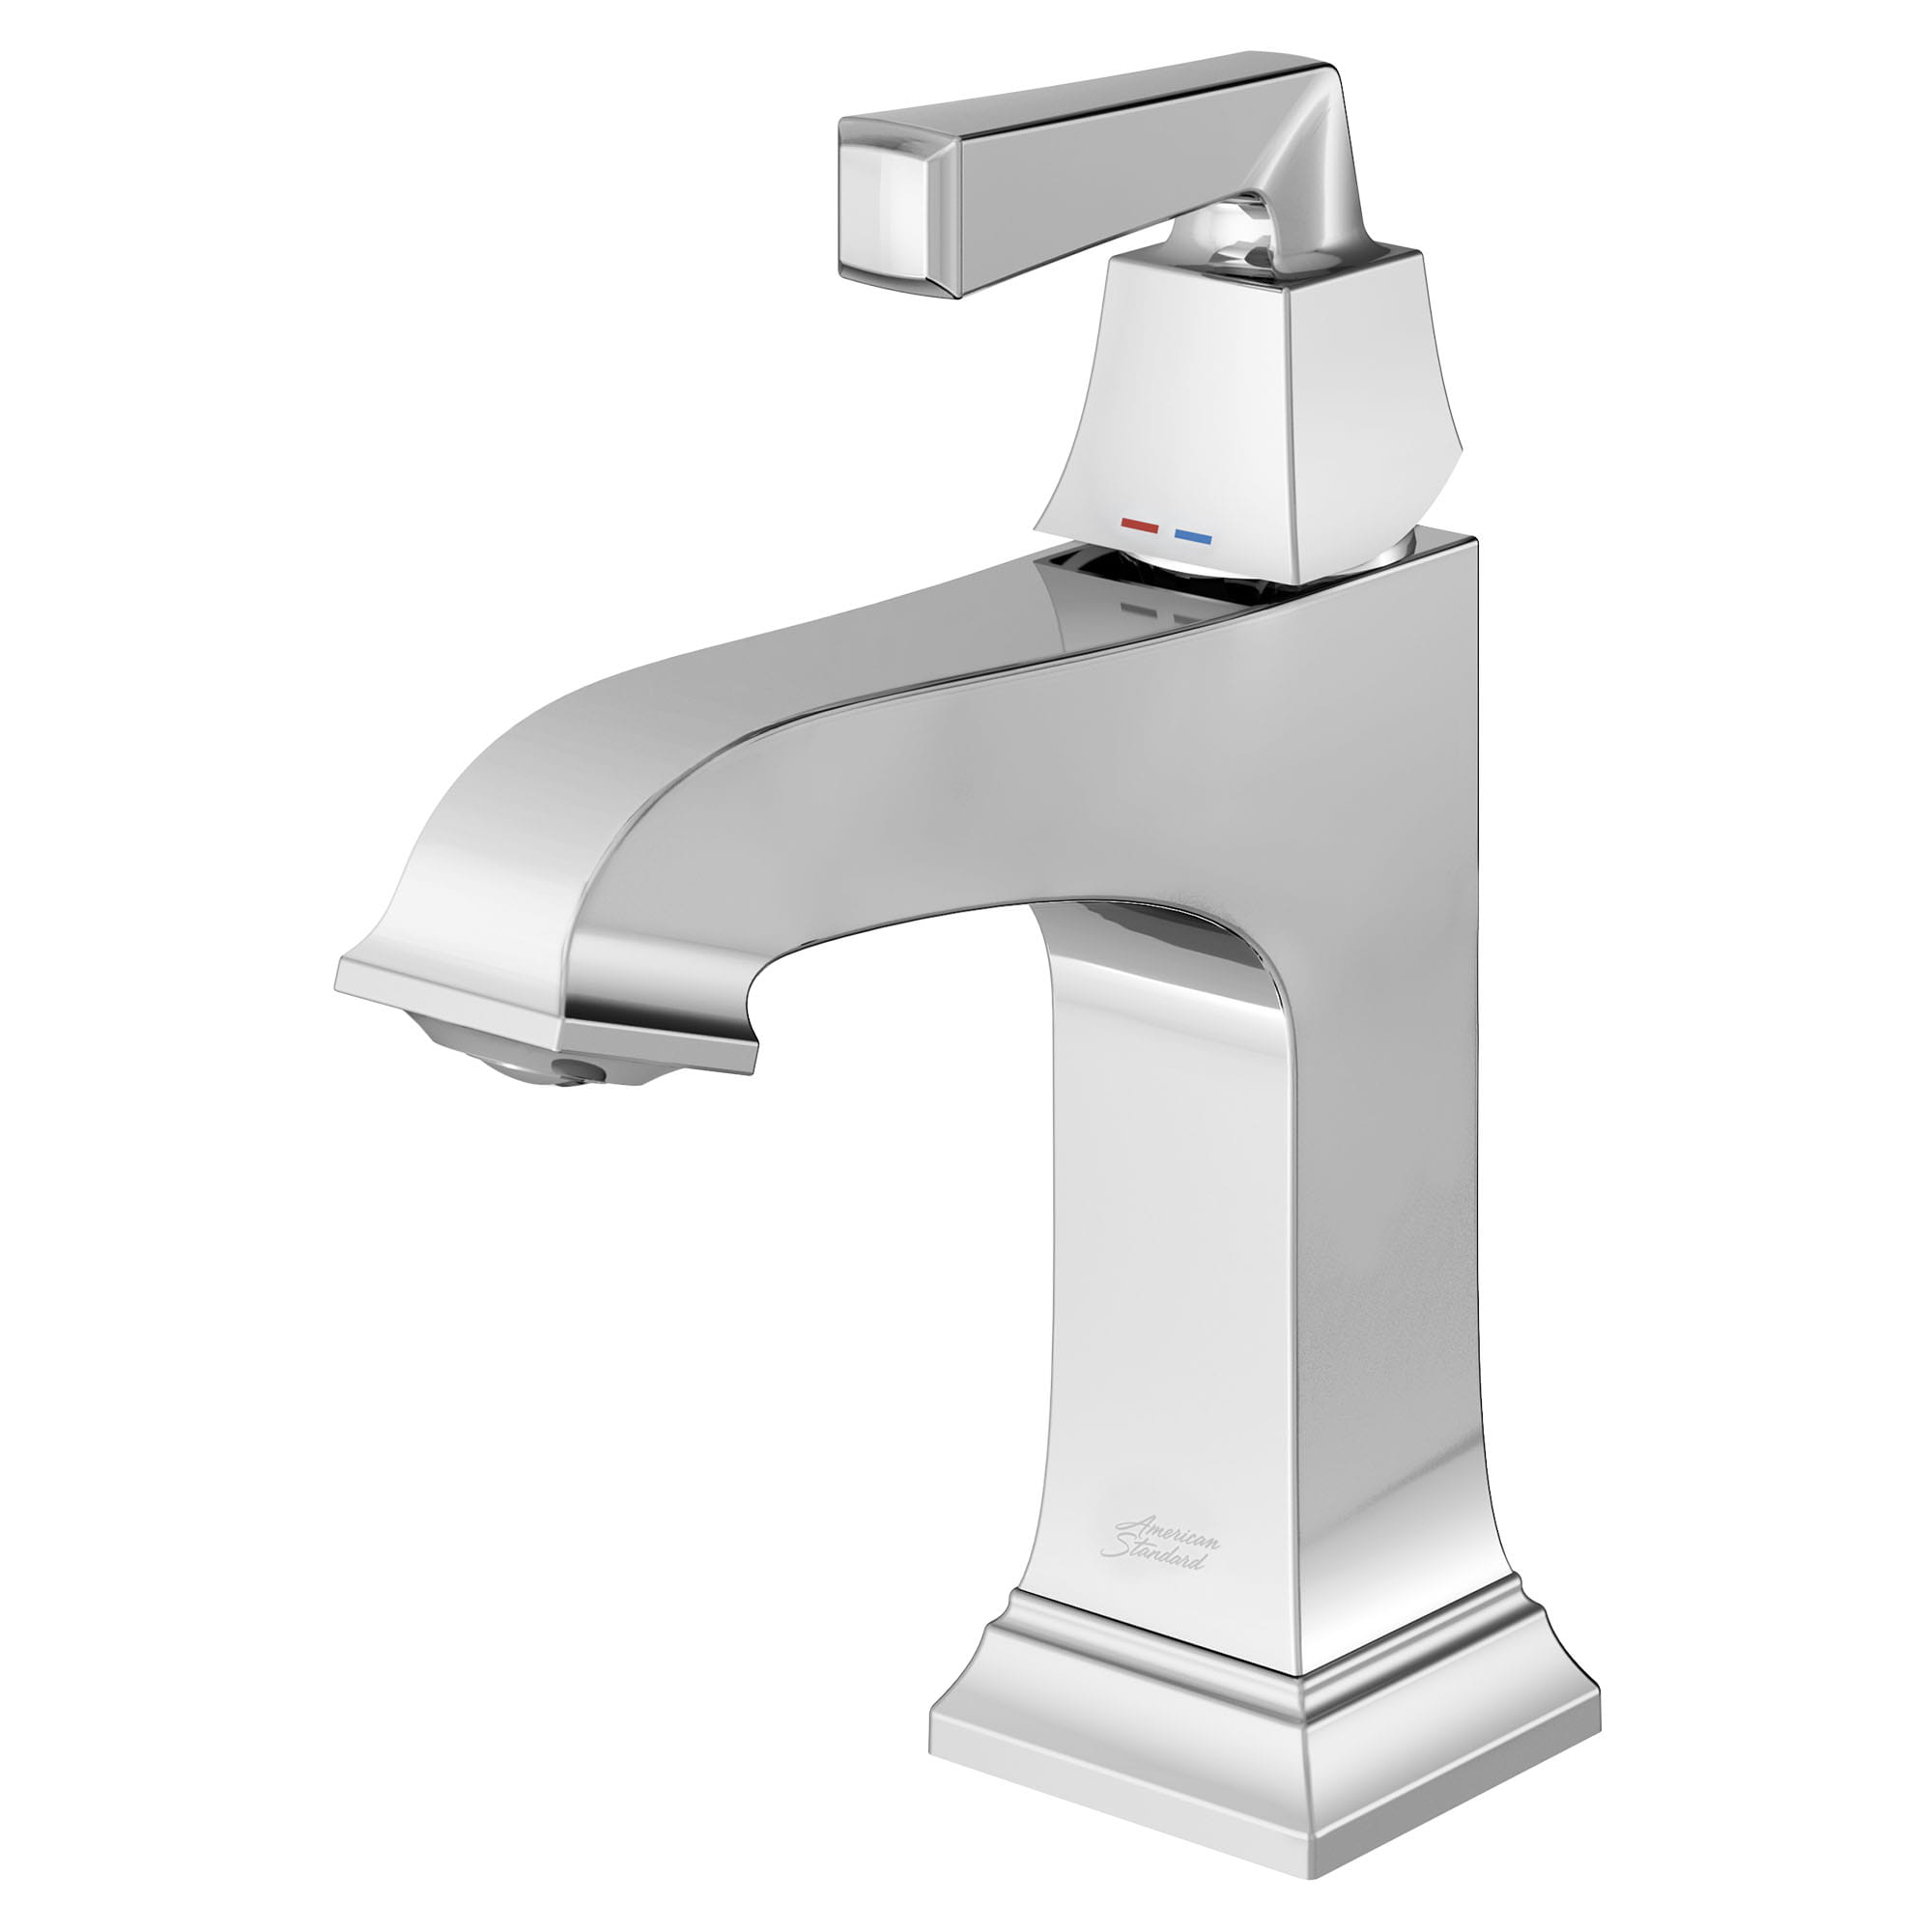 Town Square S Single Hole Single Handle Bathroom Faucet 12 gpm 45 L min With Lever Handle CHROME